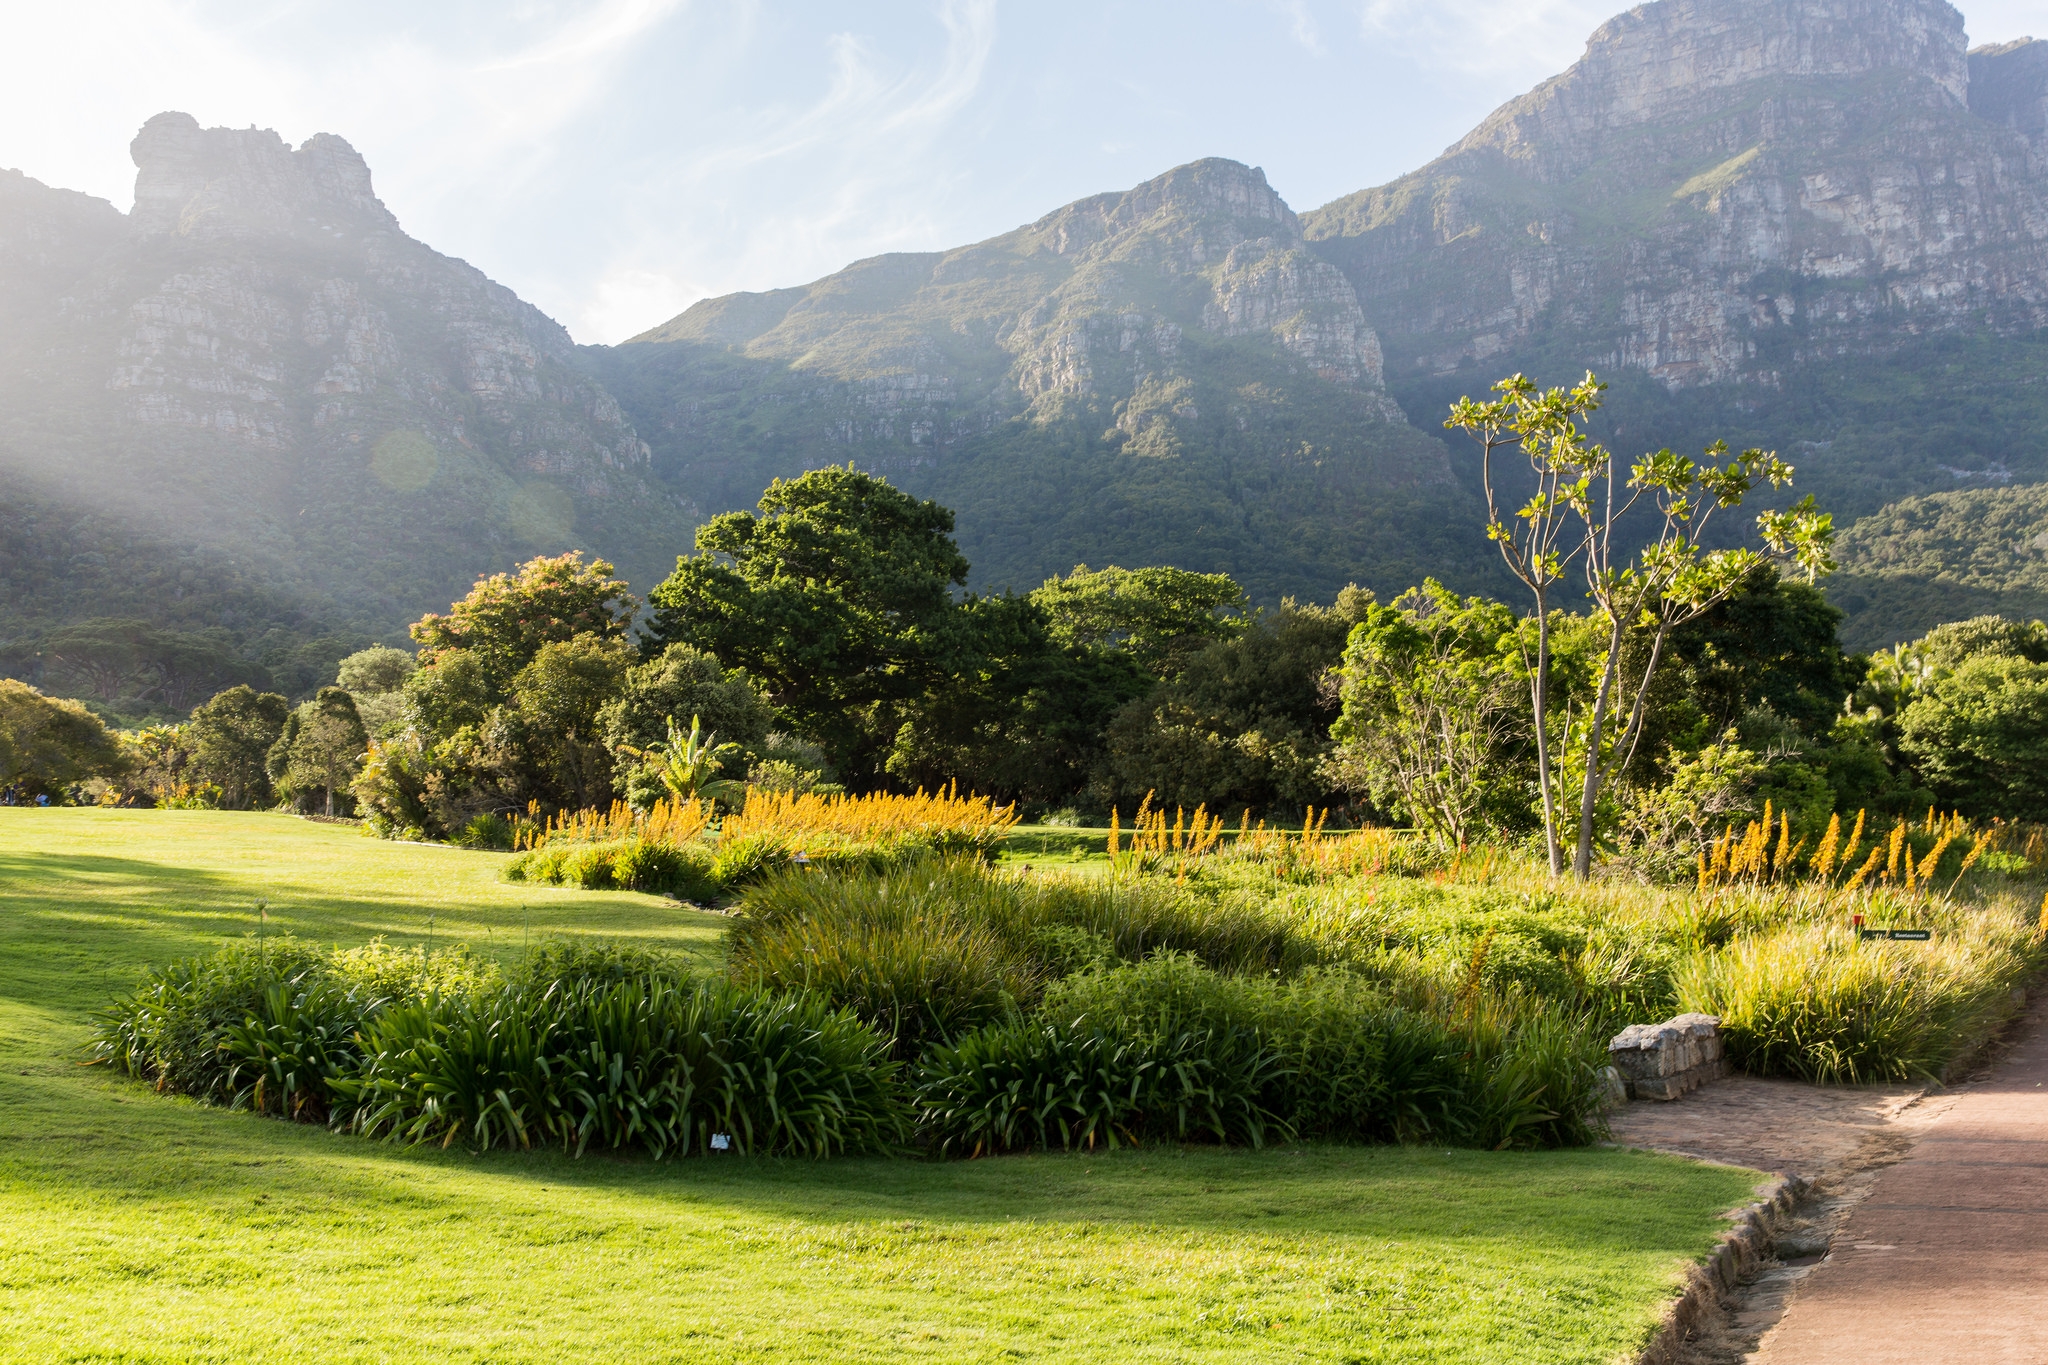 What is the name of this beautiful garden located in South Africa?